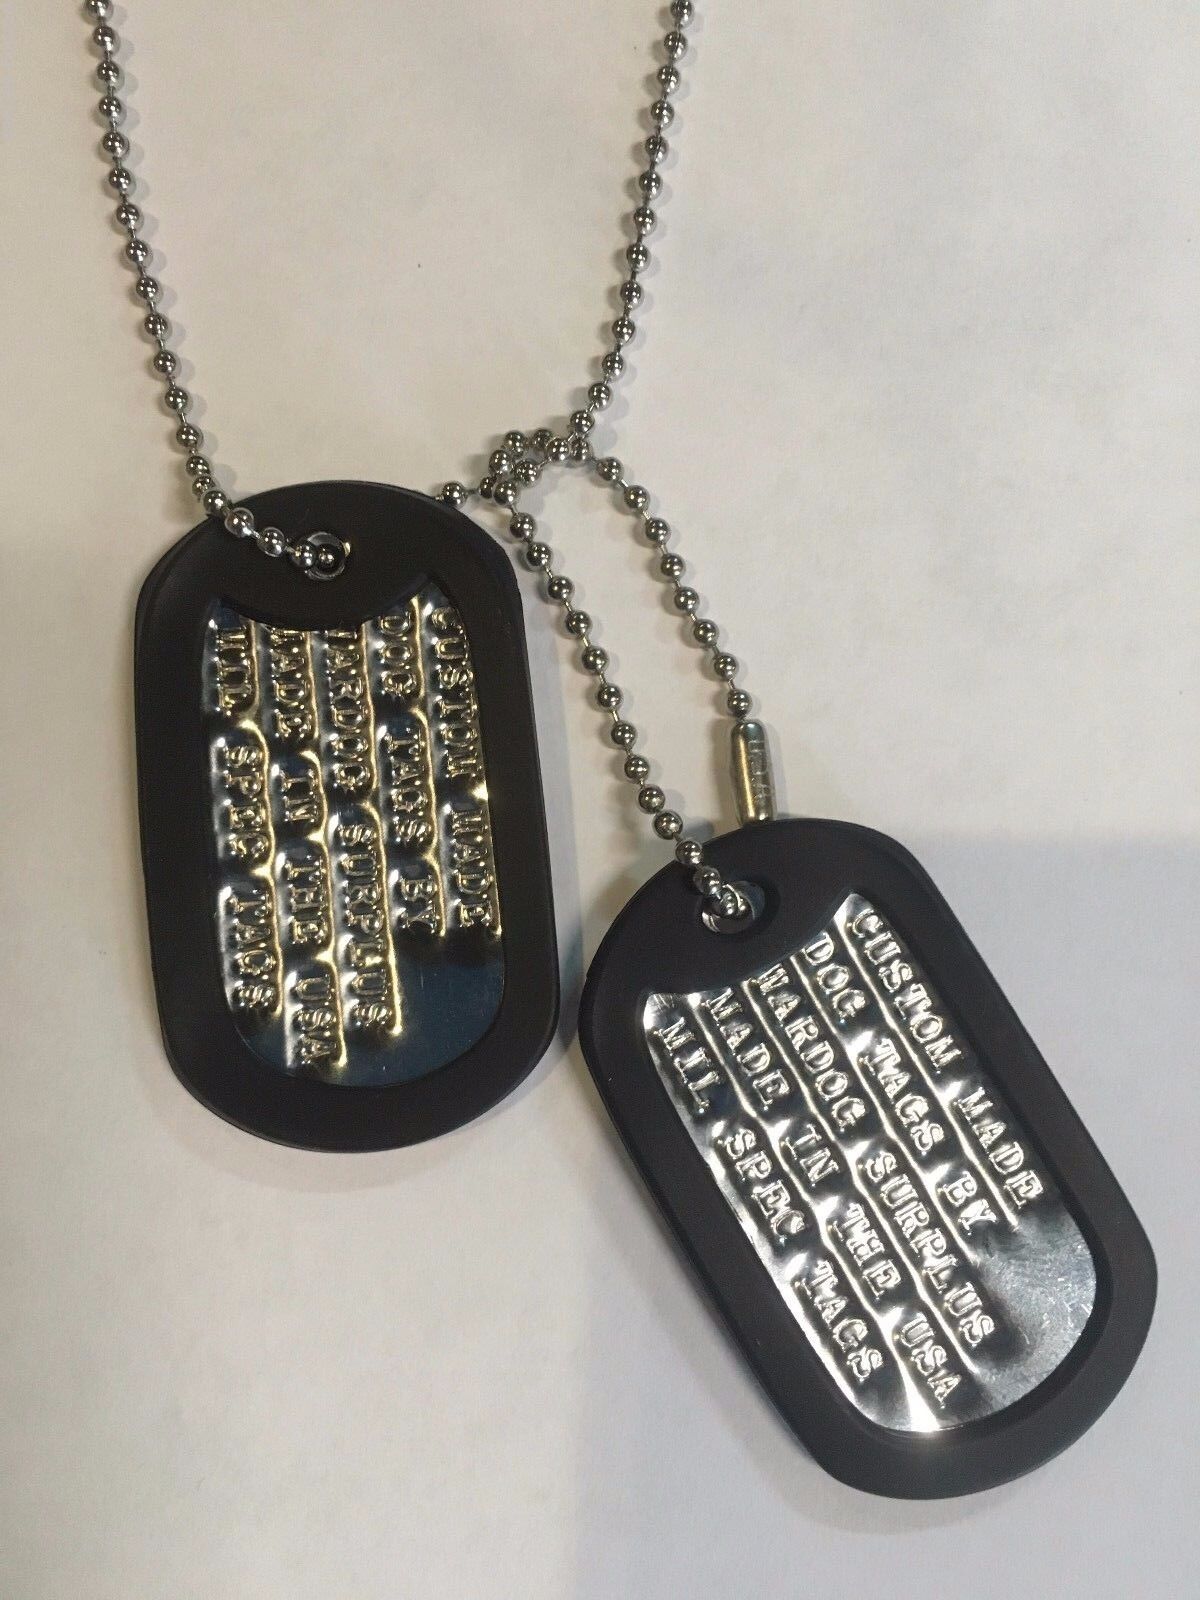 MILITARY PERSONALIZED DOG TAGS SET - CUSTOM WITH YOUR INFO - NECKLACE ID TAG US